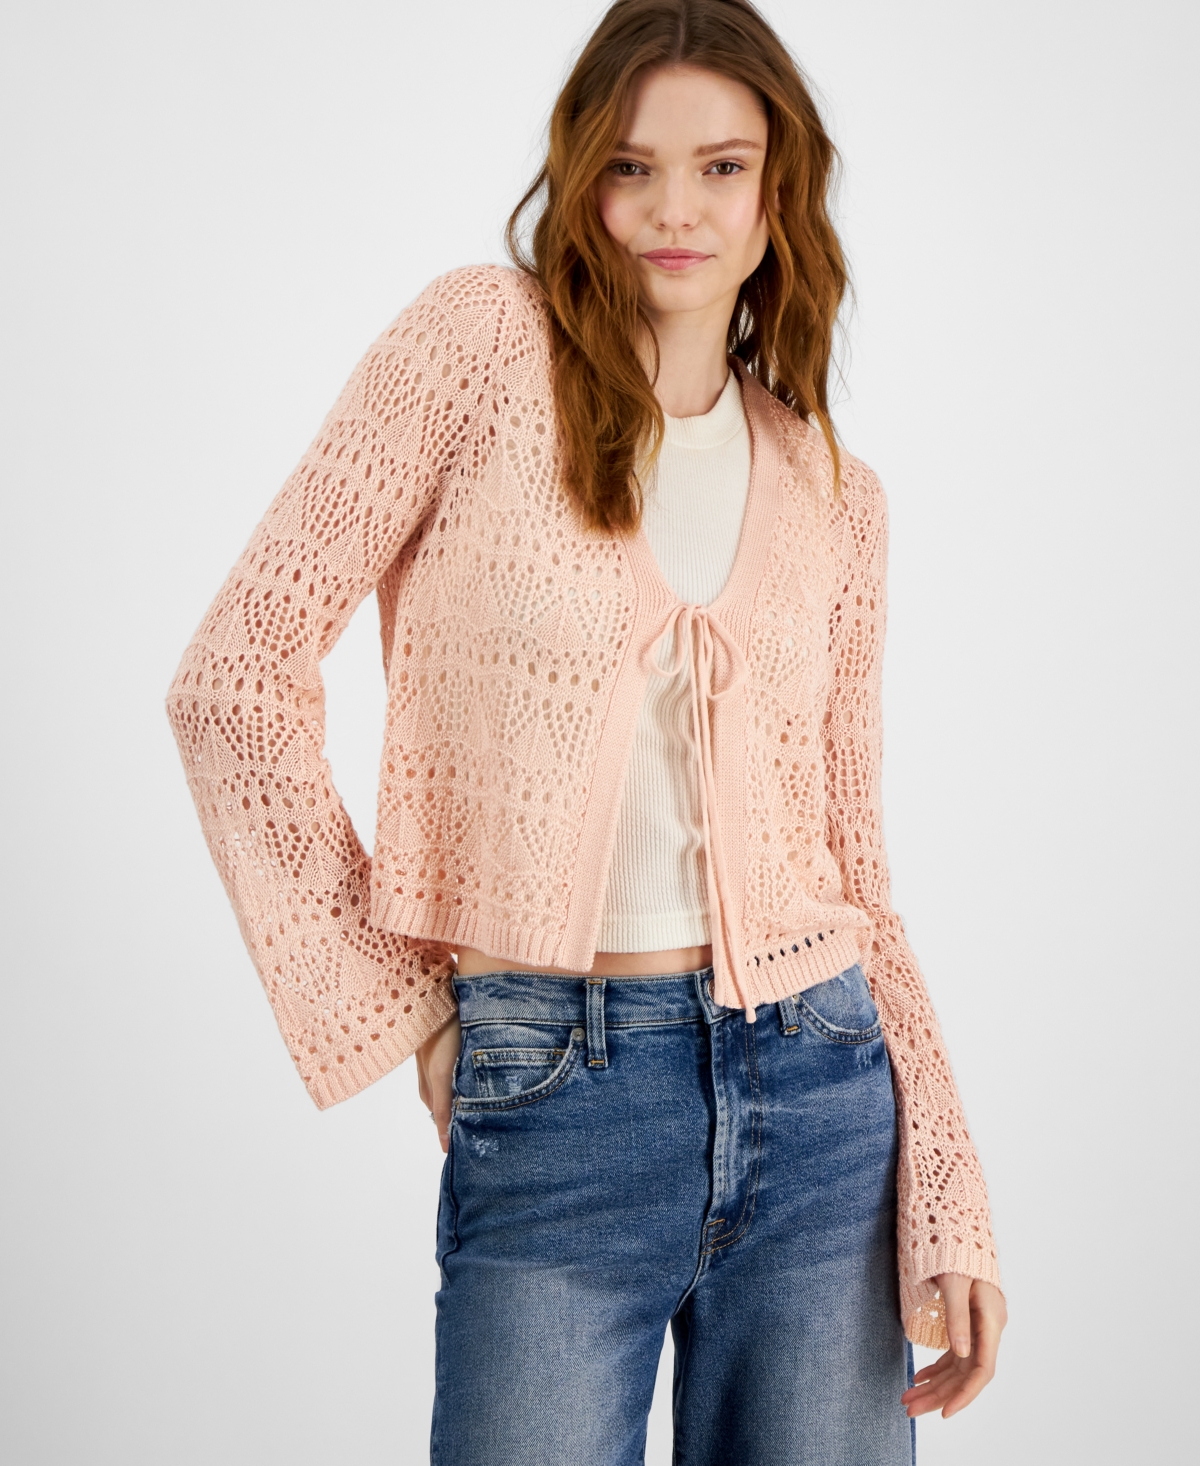 Hooked Up by Iot Juniors' Open-Knit Tie-Front Cardigan Sweater